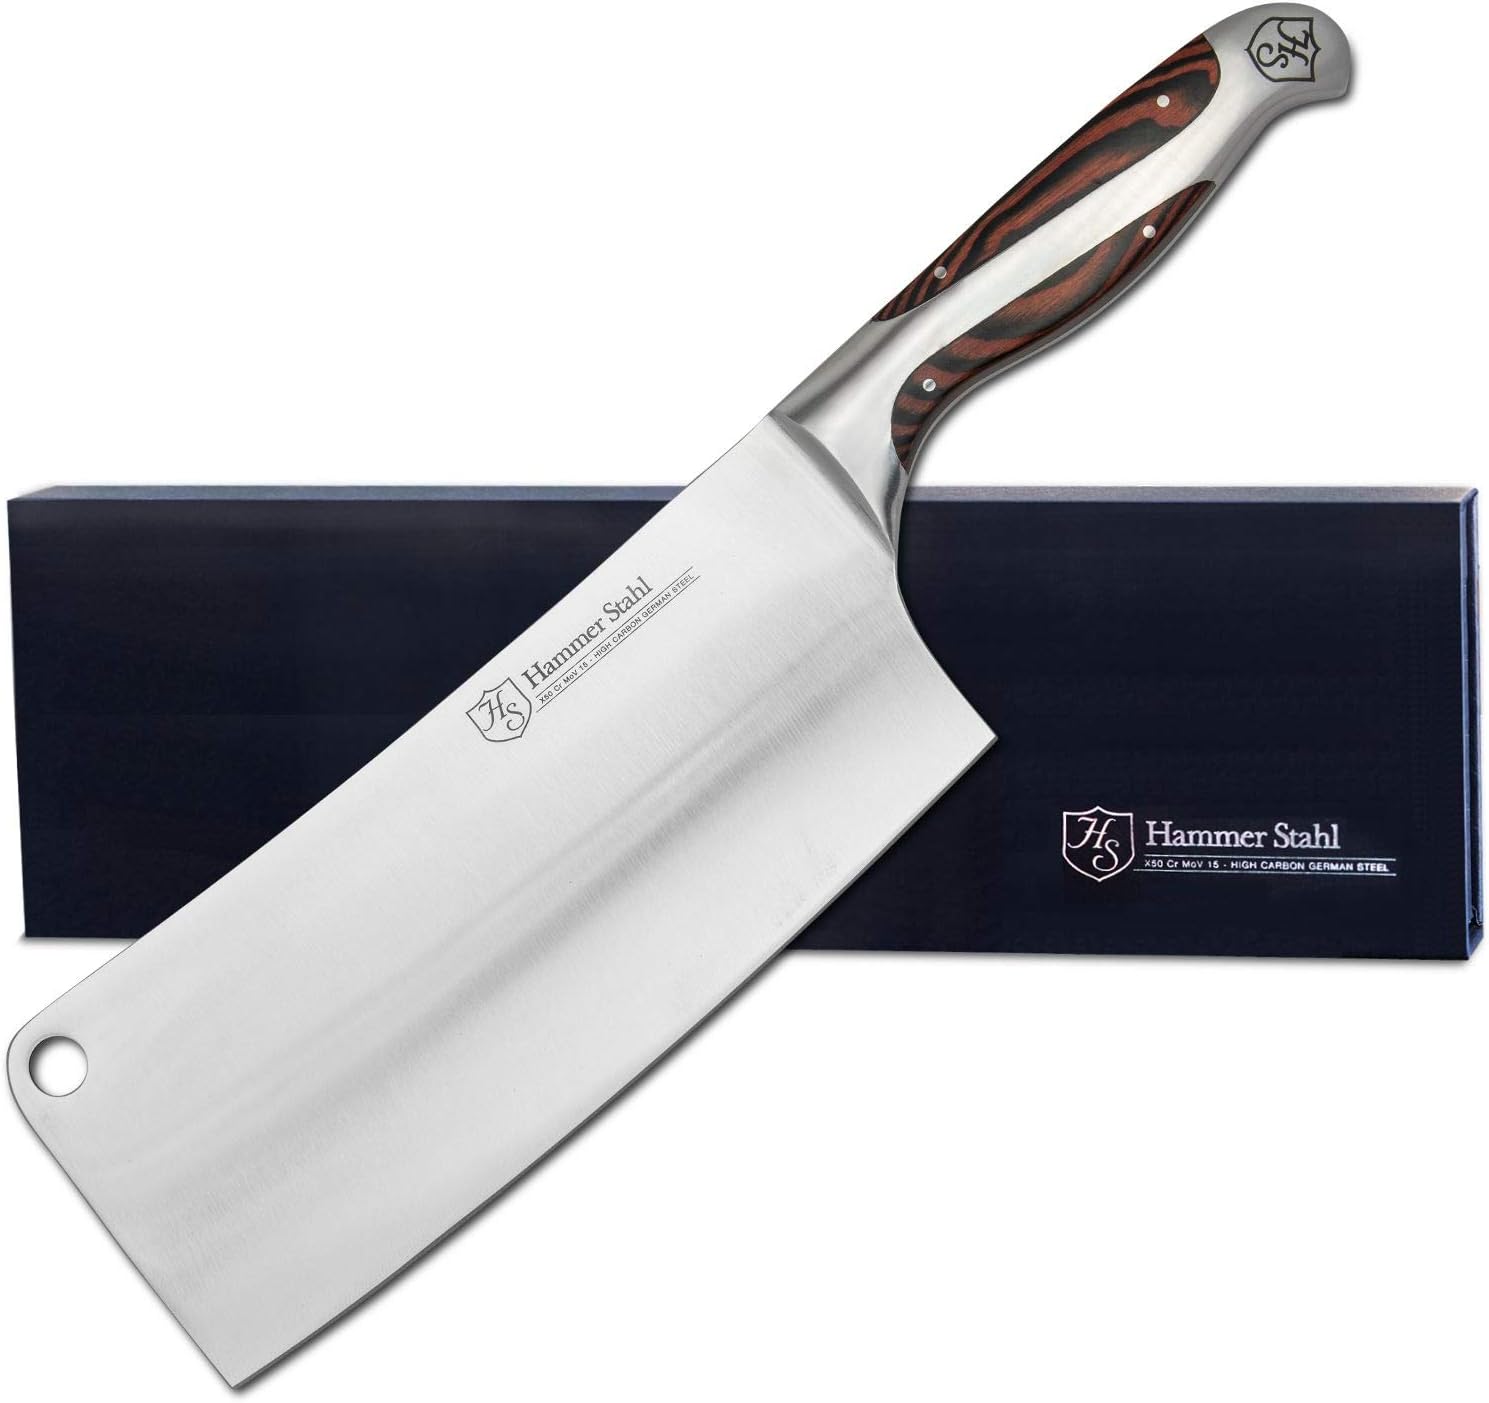 Hammer Stahl 8-Inch Meat Cleaver | Professional Quality Kitchen Cleaver | Ergonomic Quad-Tang Pakkawood Handle | Stainless Steel Cleaver Knife | German Forged High Carbon Steel | Butcher Cleaver Knife